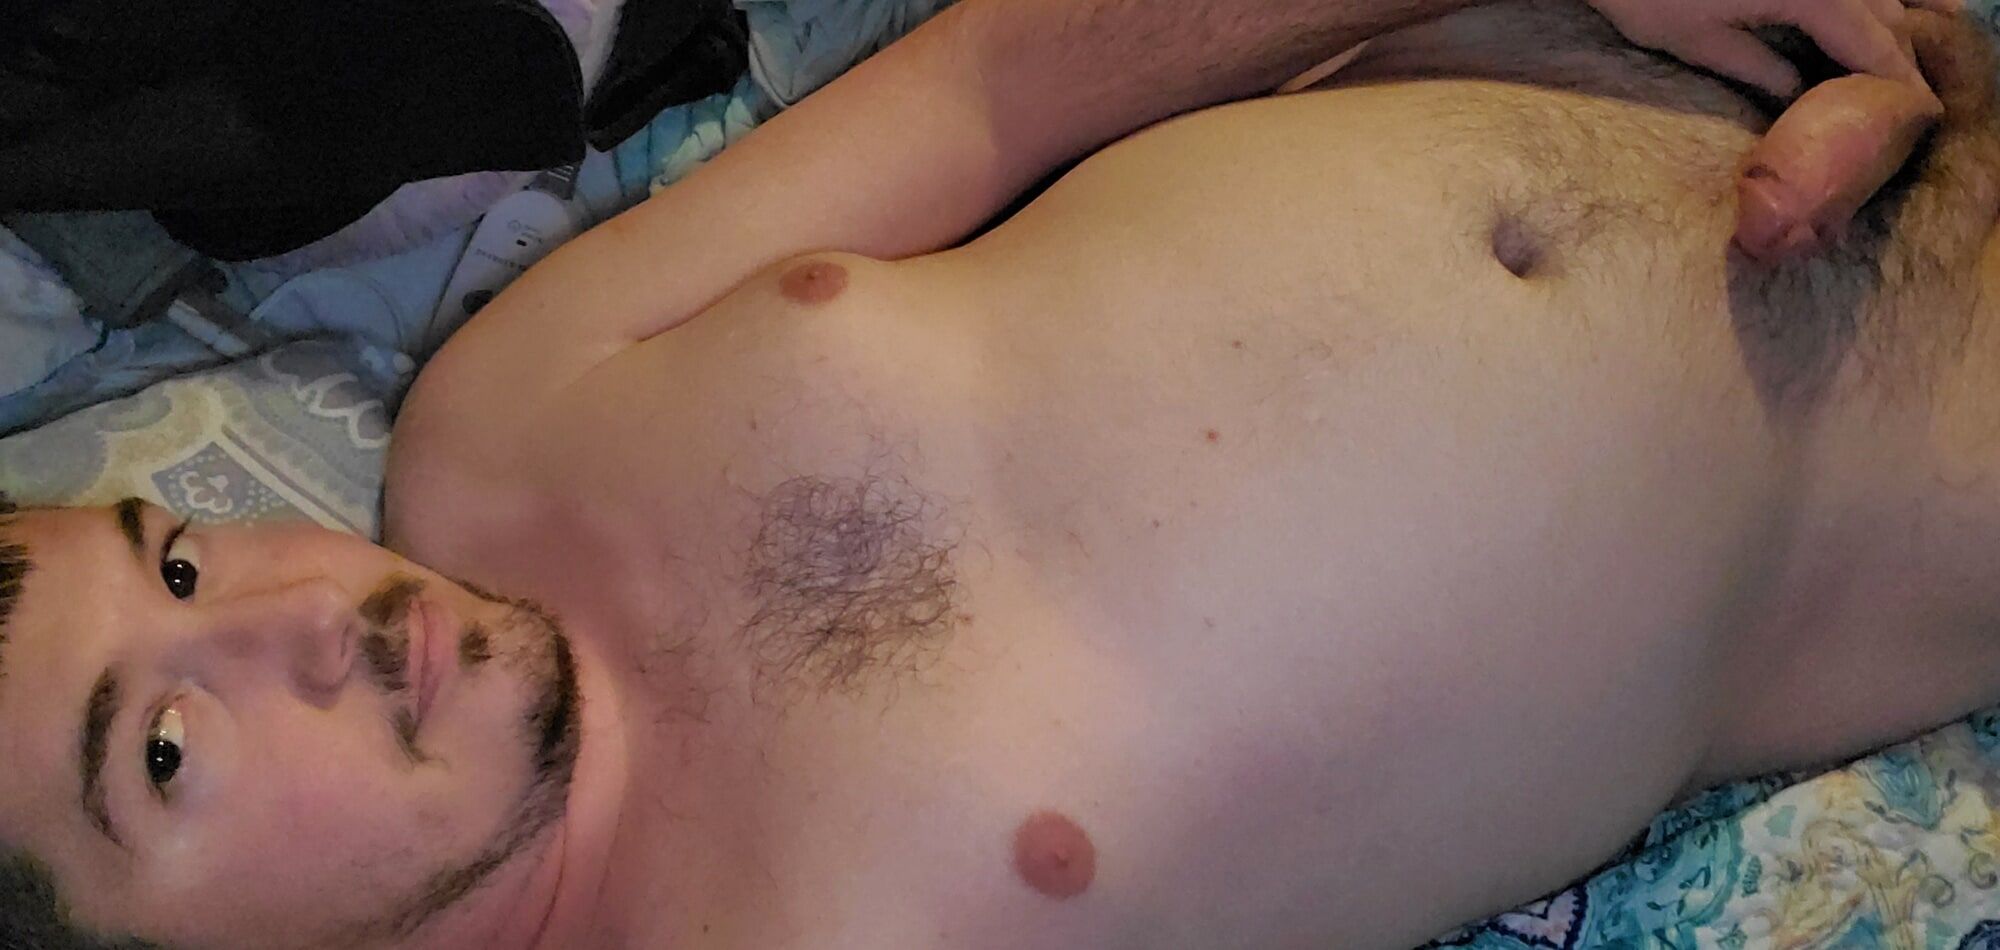 My bod and cock #10